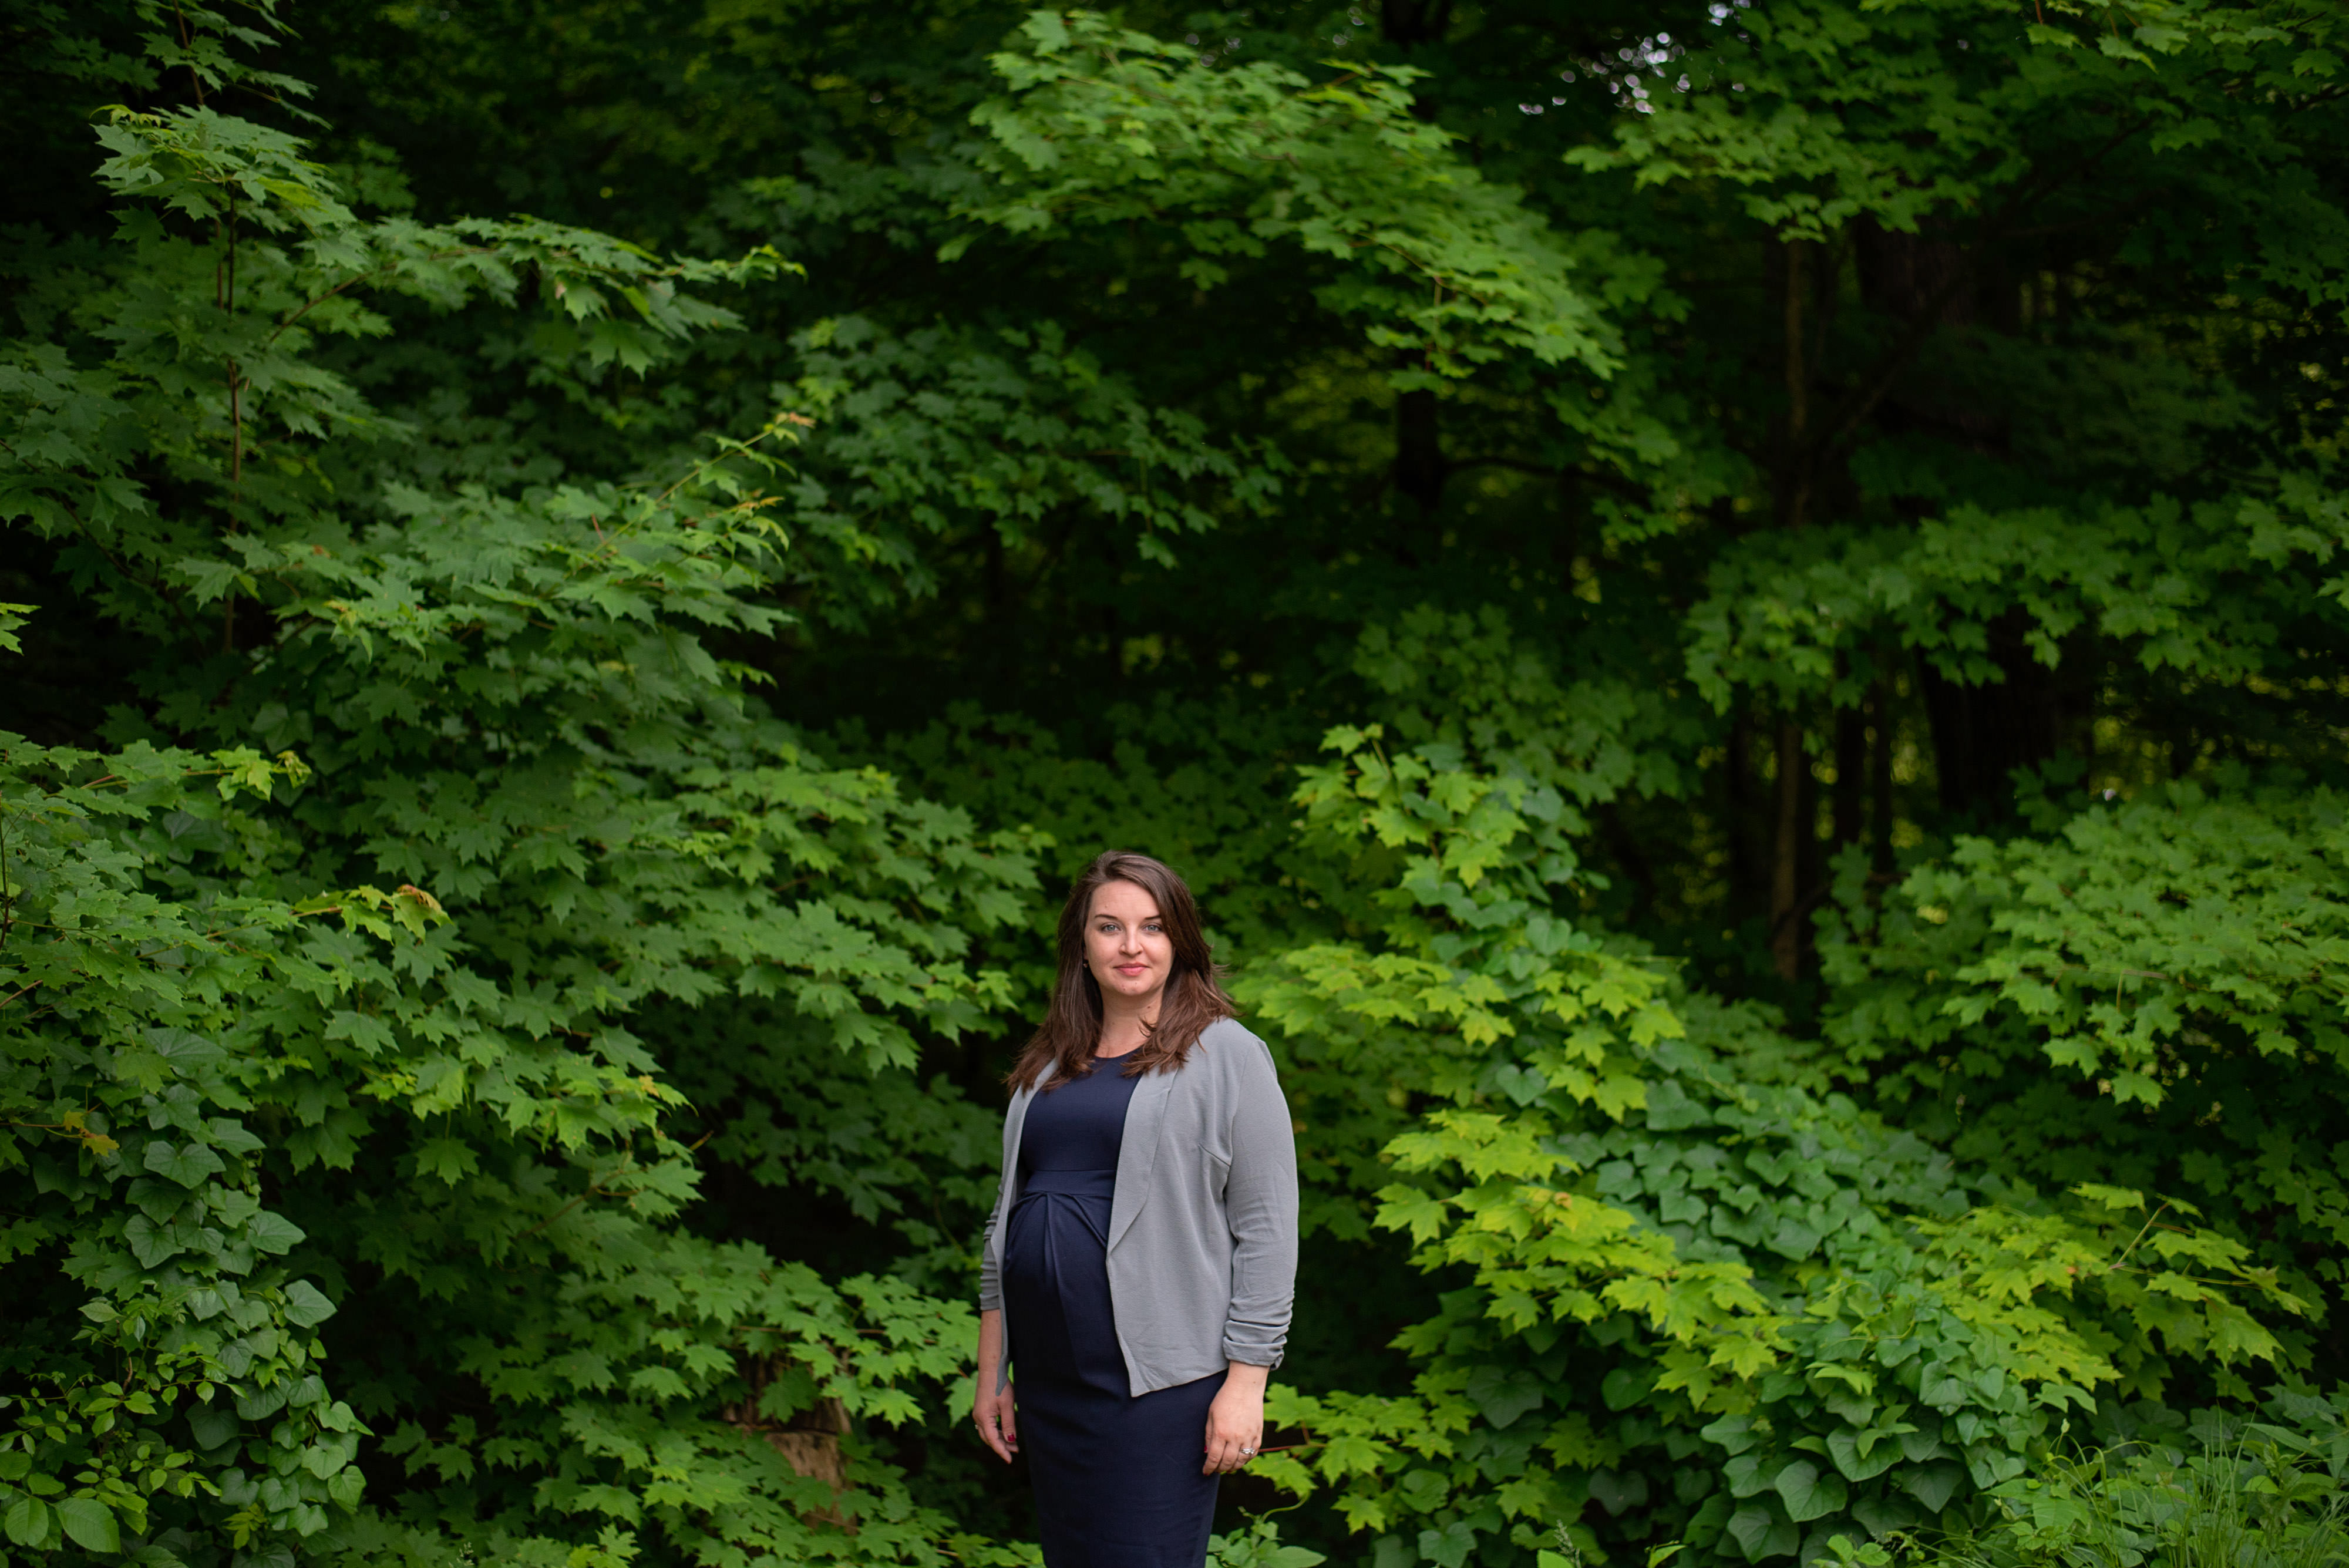 A portrait of a woman in front of green leafy trees.